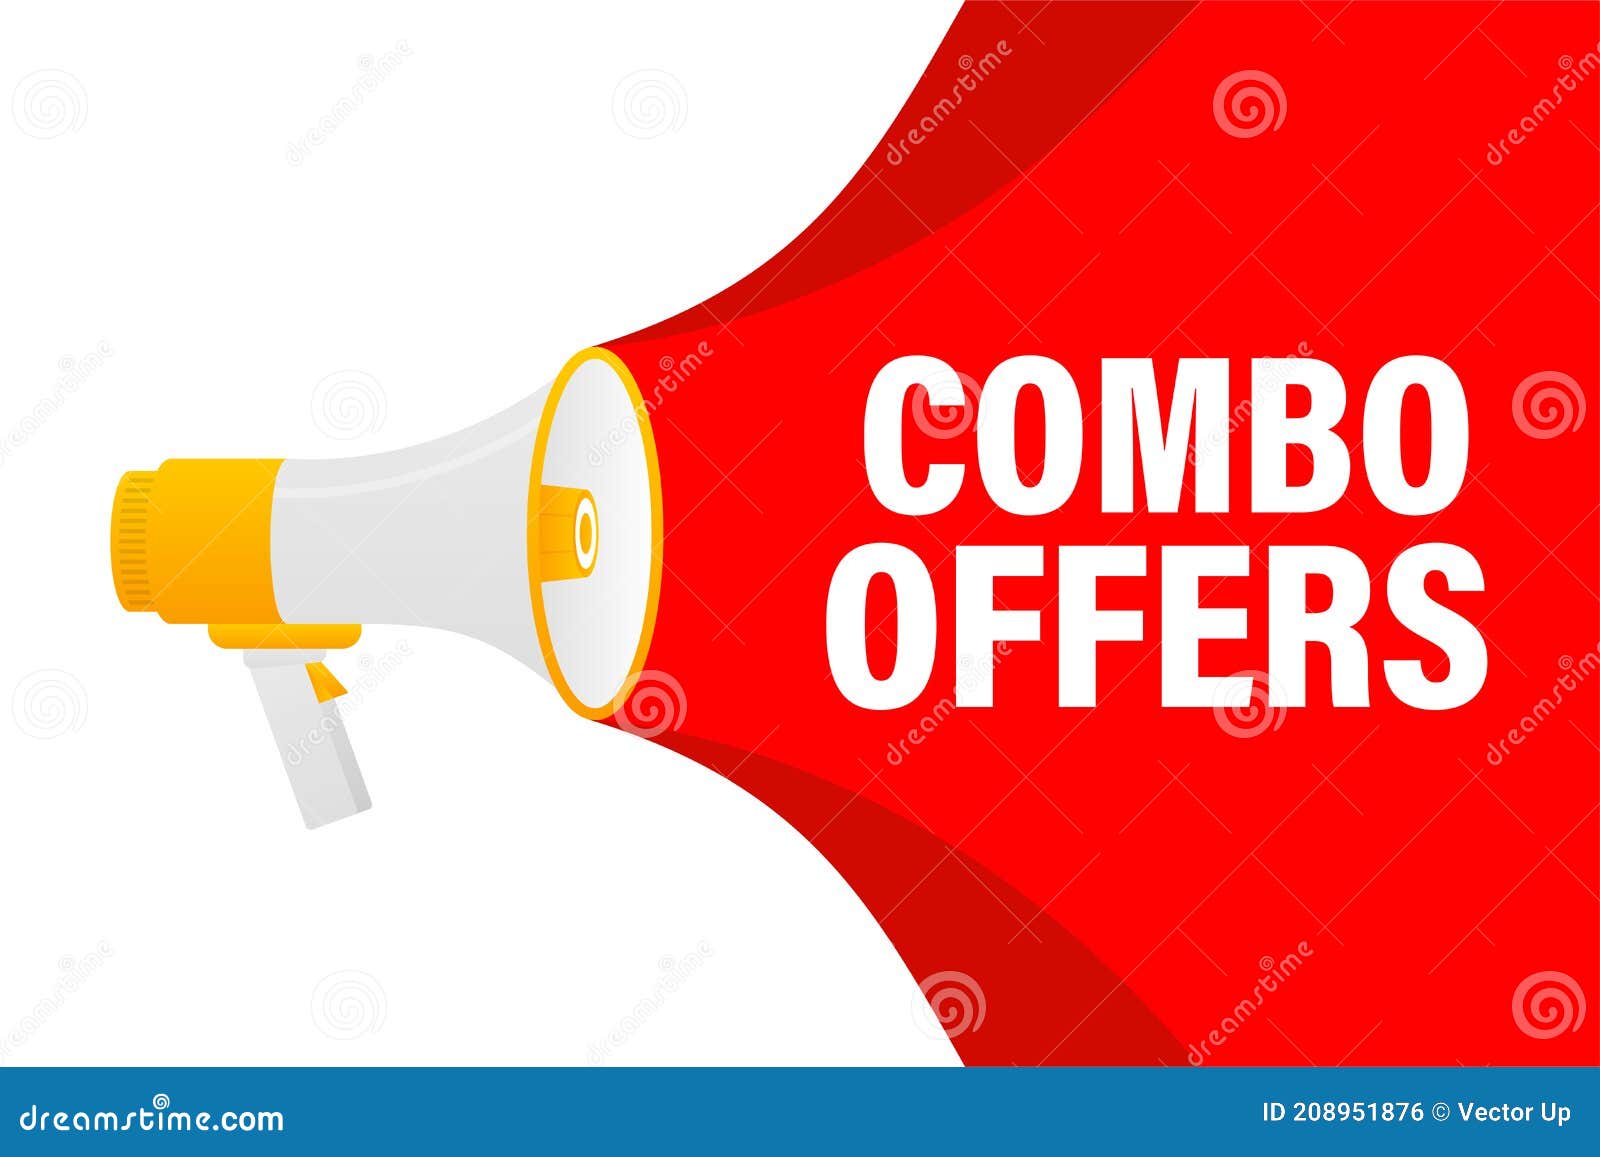 Combo Offers Megaphone Red Banner in 3D Style on White Background